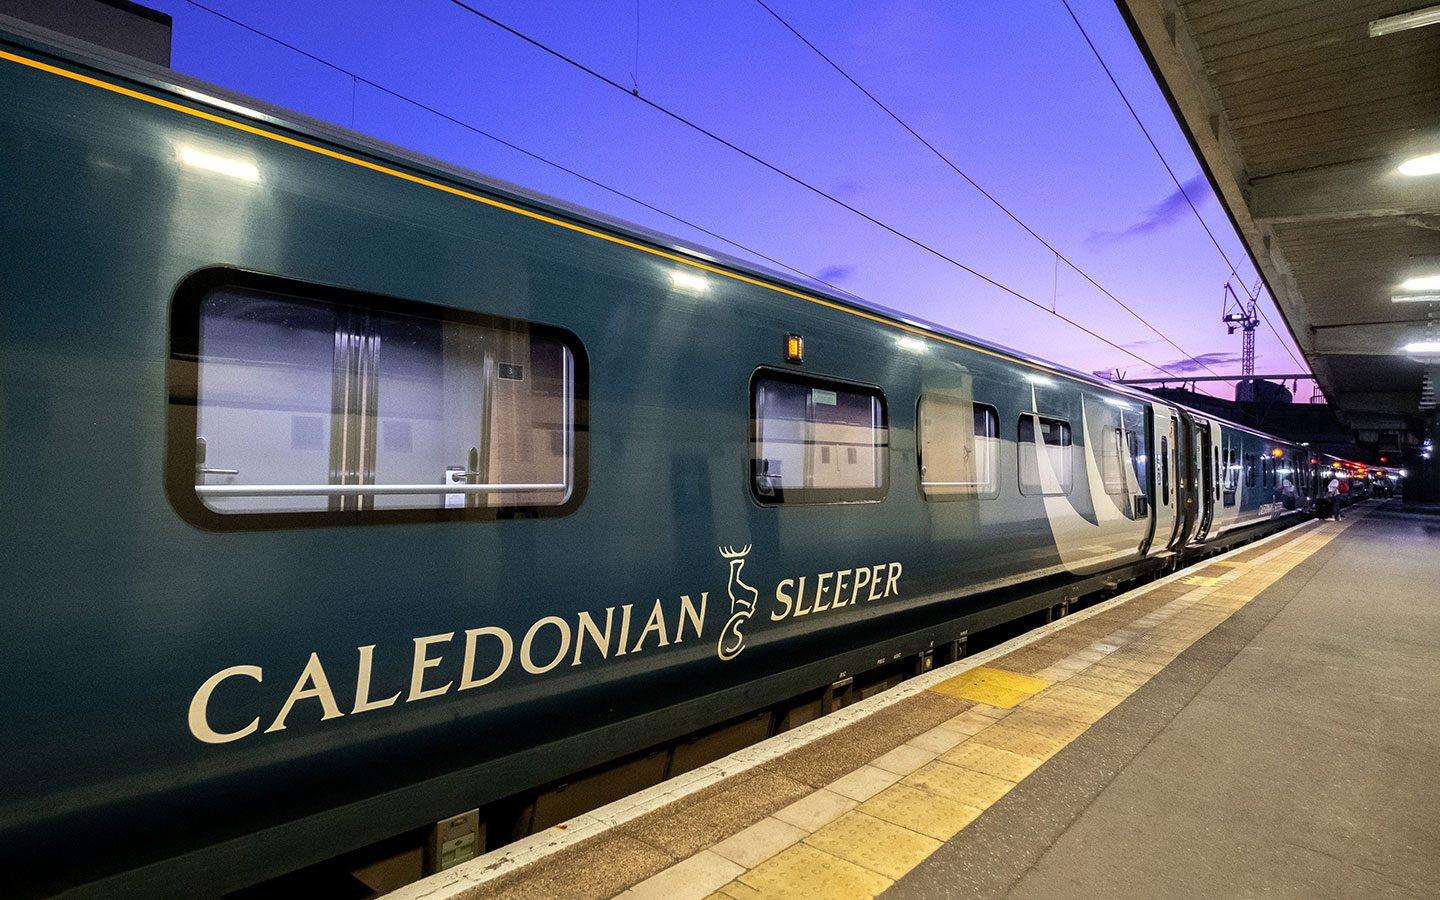 The Caledonian Sleeper train to Scotland, one of the 10 ways to travel more sustainably